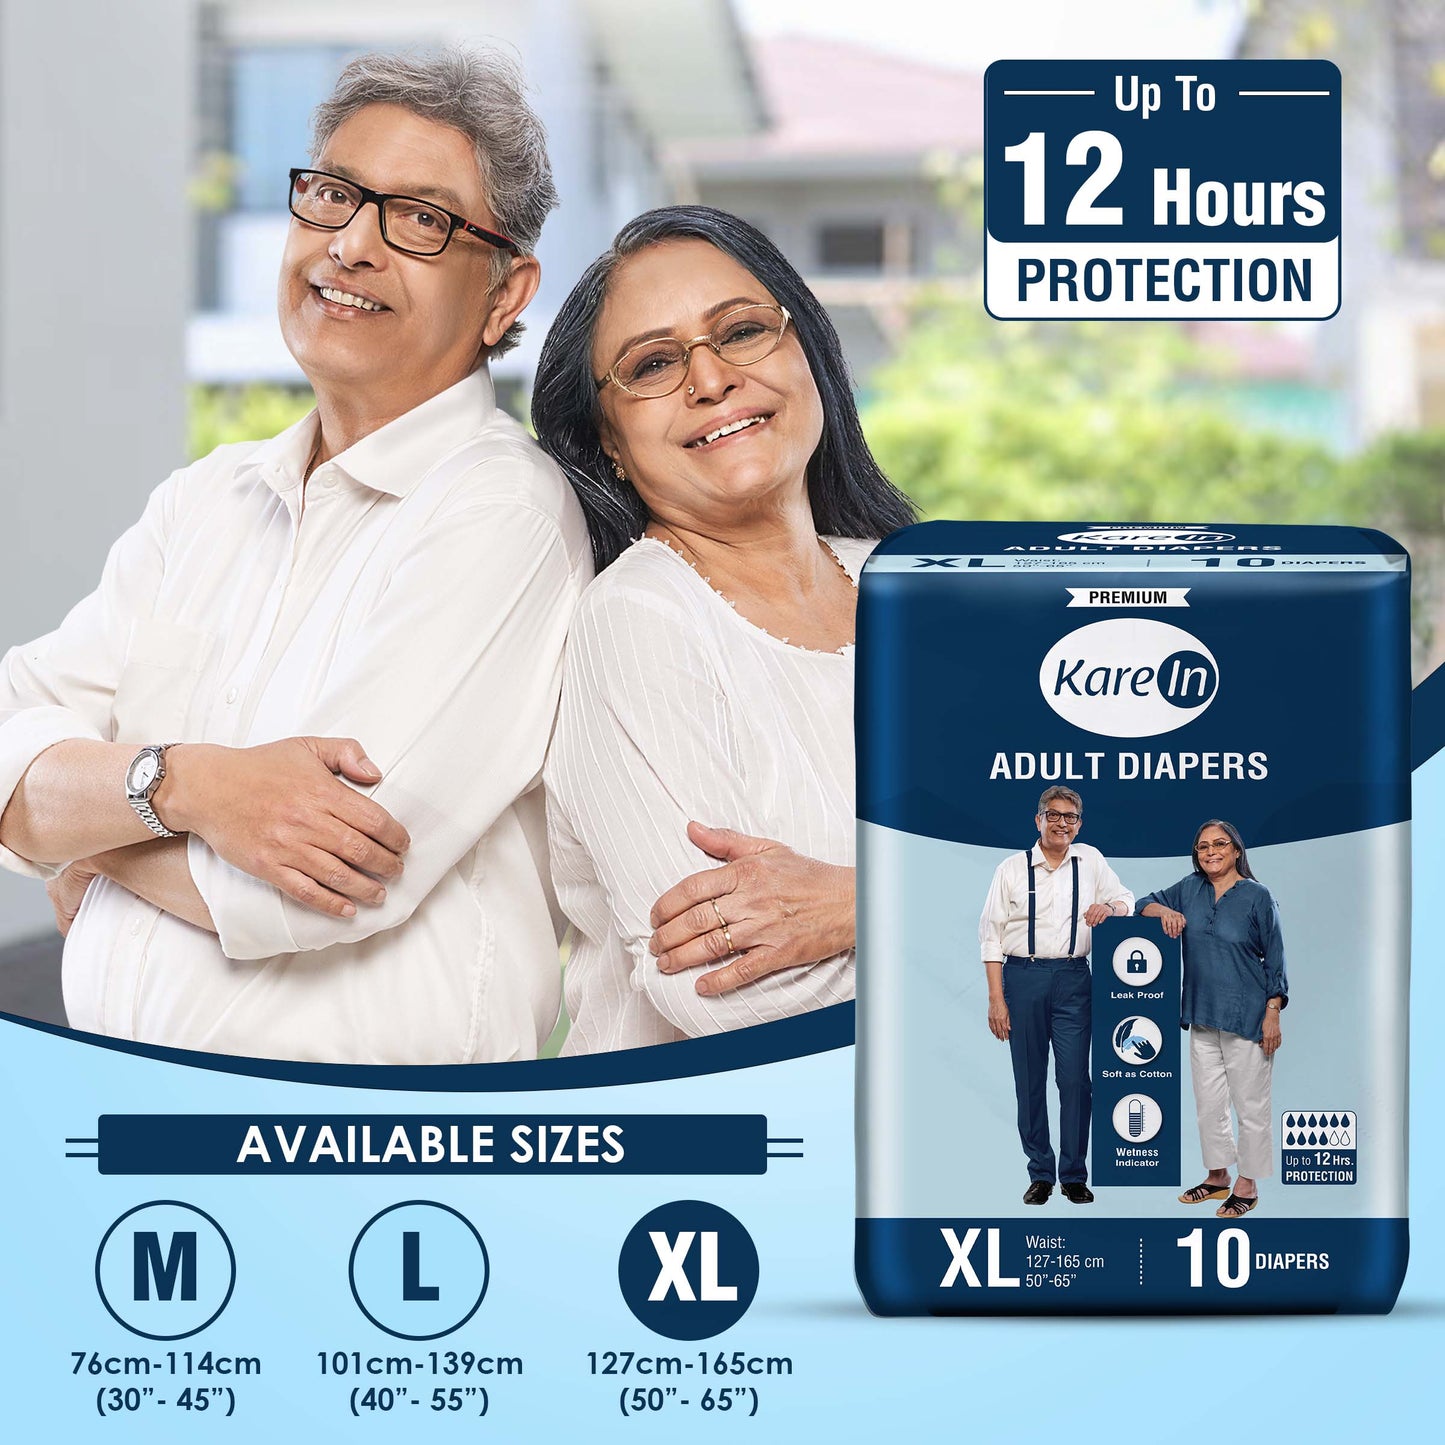 KareIn Premium Adult Diapers, Extra Large, Waist Size127-165 Cm (50"-65"), Tape Style, Unisex, High Absorbency, Leak Proof, Wetness Indicator, Pack of 3, 30 diapers